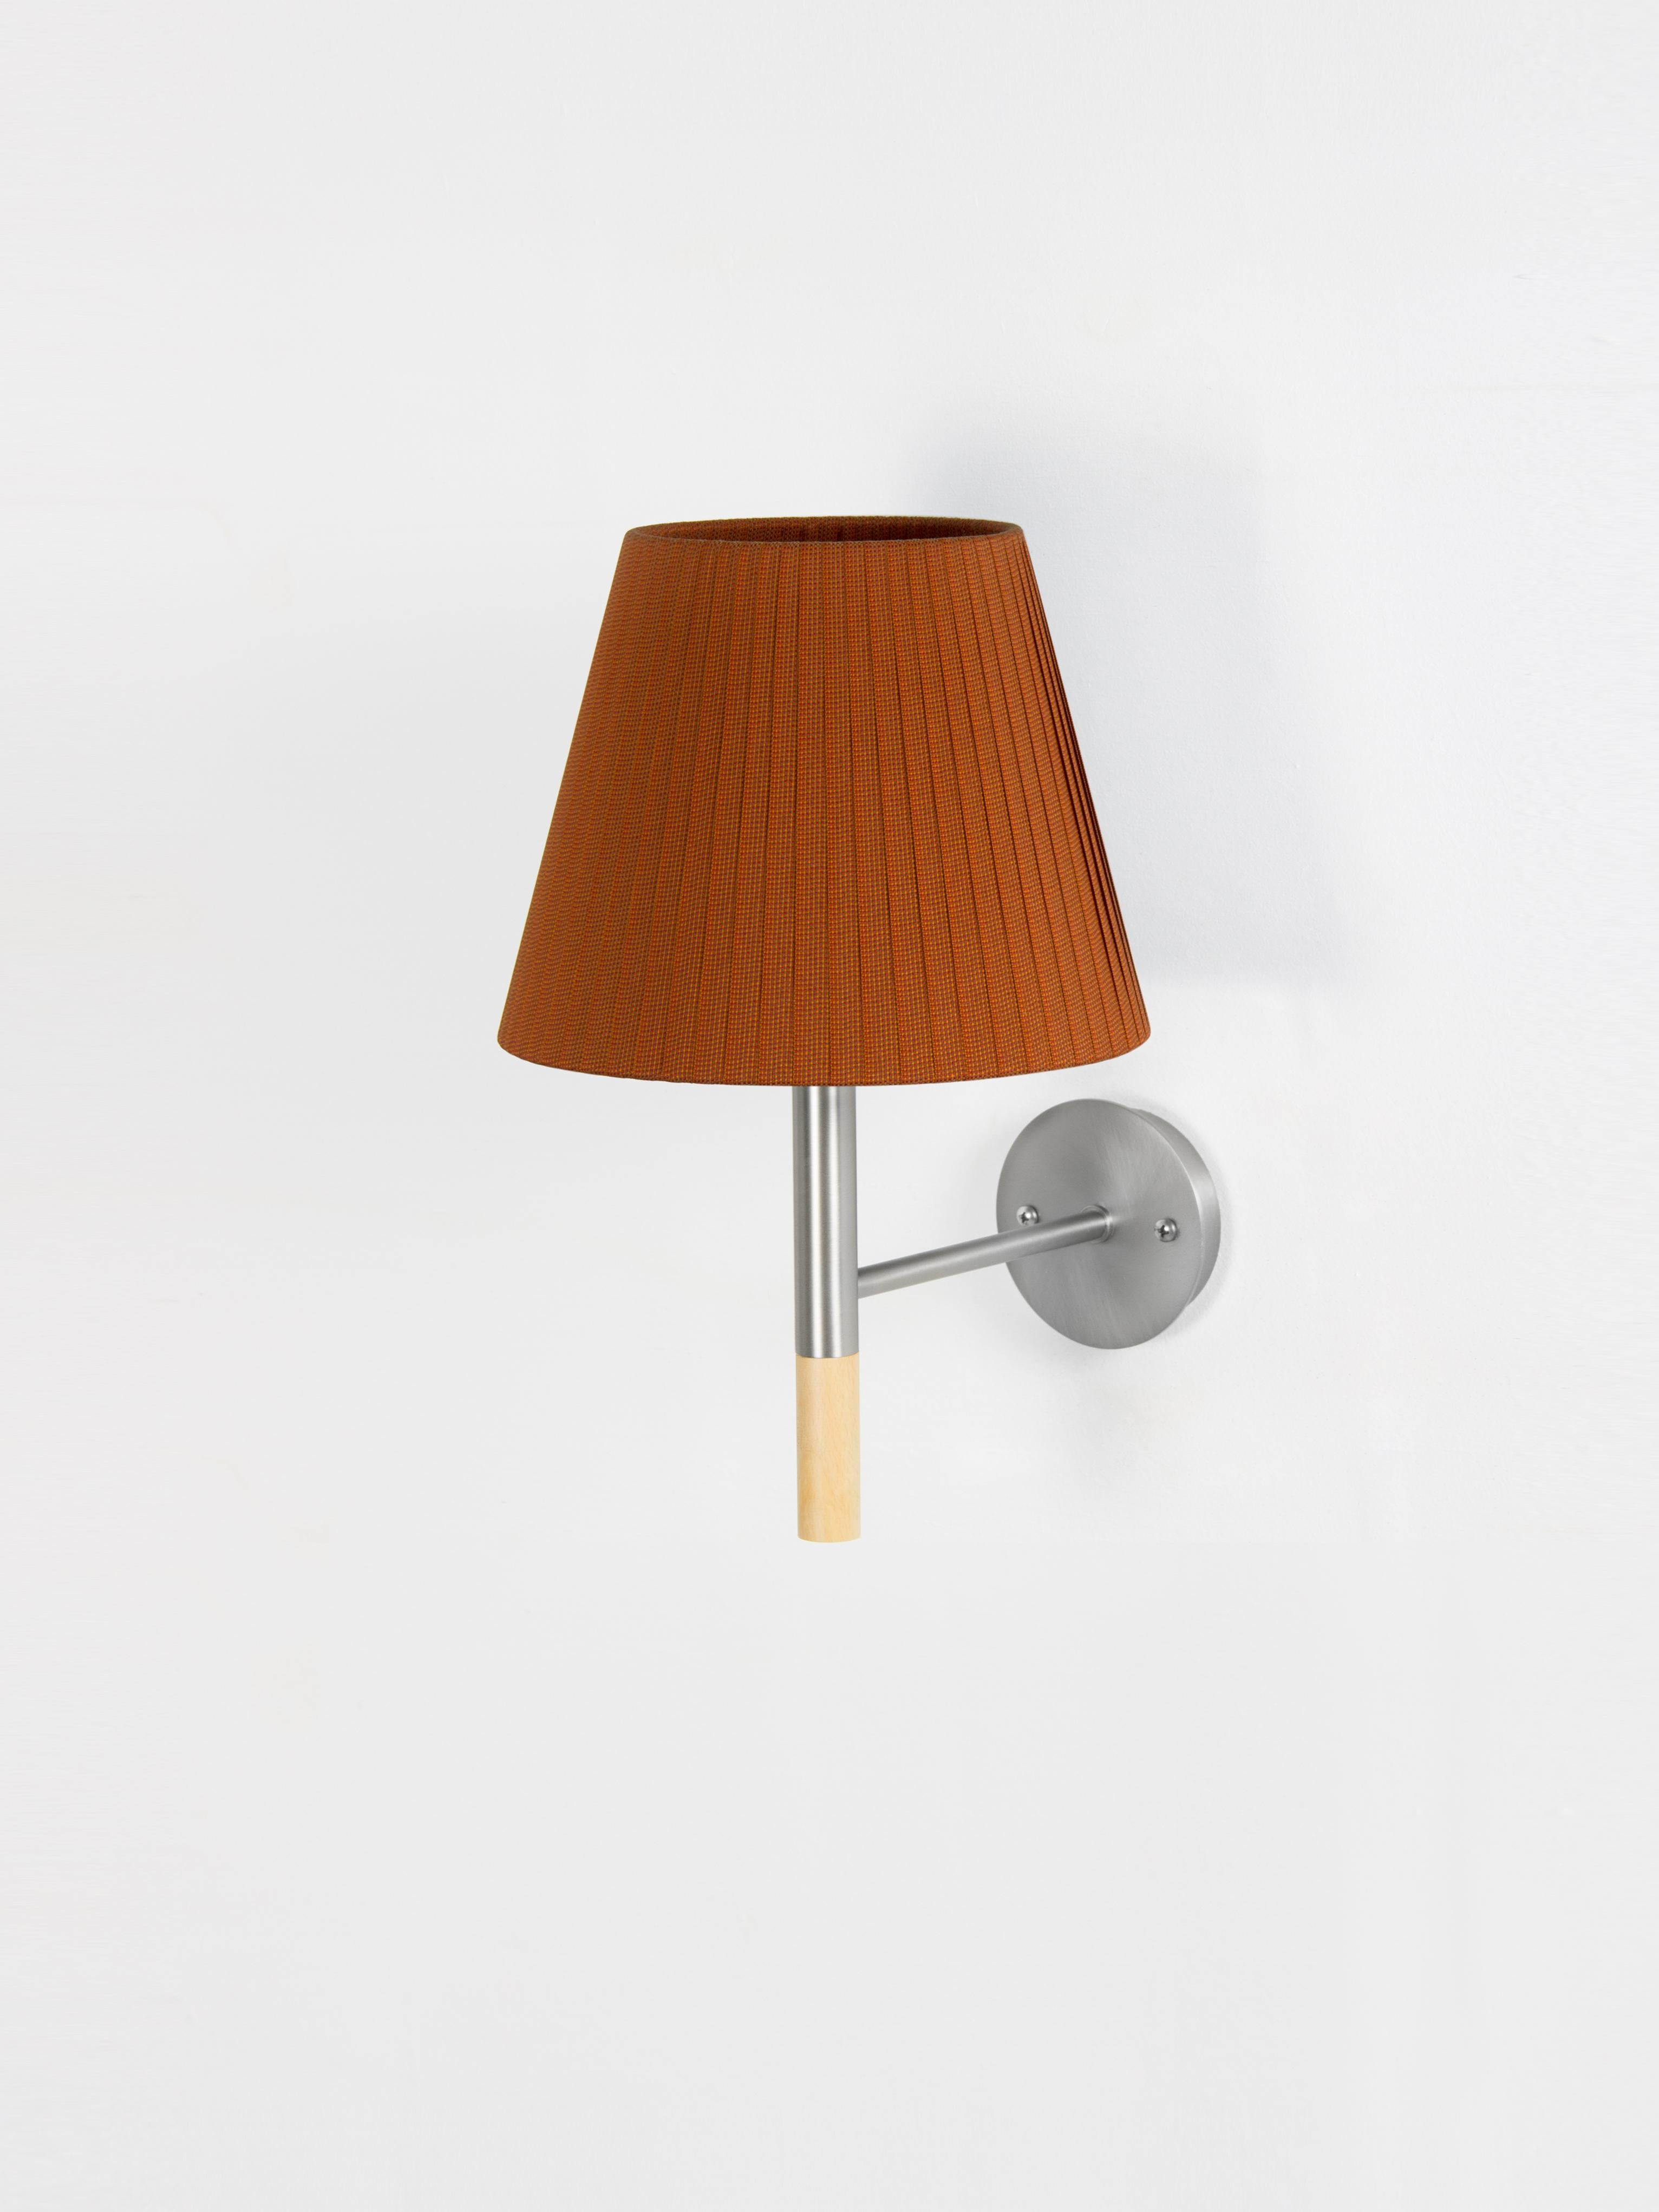 Terracotta BC2 wall lamp by Santa & Cole
Dimensions: D 20 x W 26 x H 33 cm
Materials: Metal, beech wood, ribbon.

The BC1, BC2 and BC3 wall lamps are the epitome of sturdy construction, aesthetic sobriety and functional quality. Their various